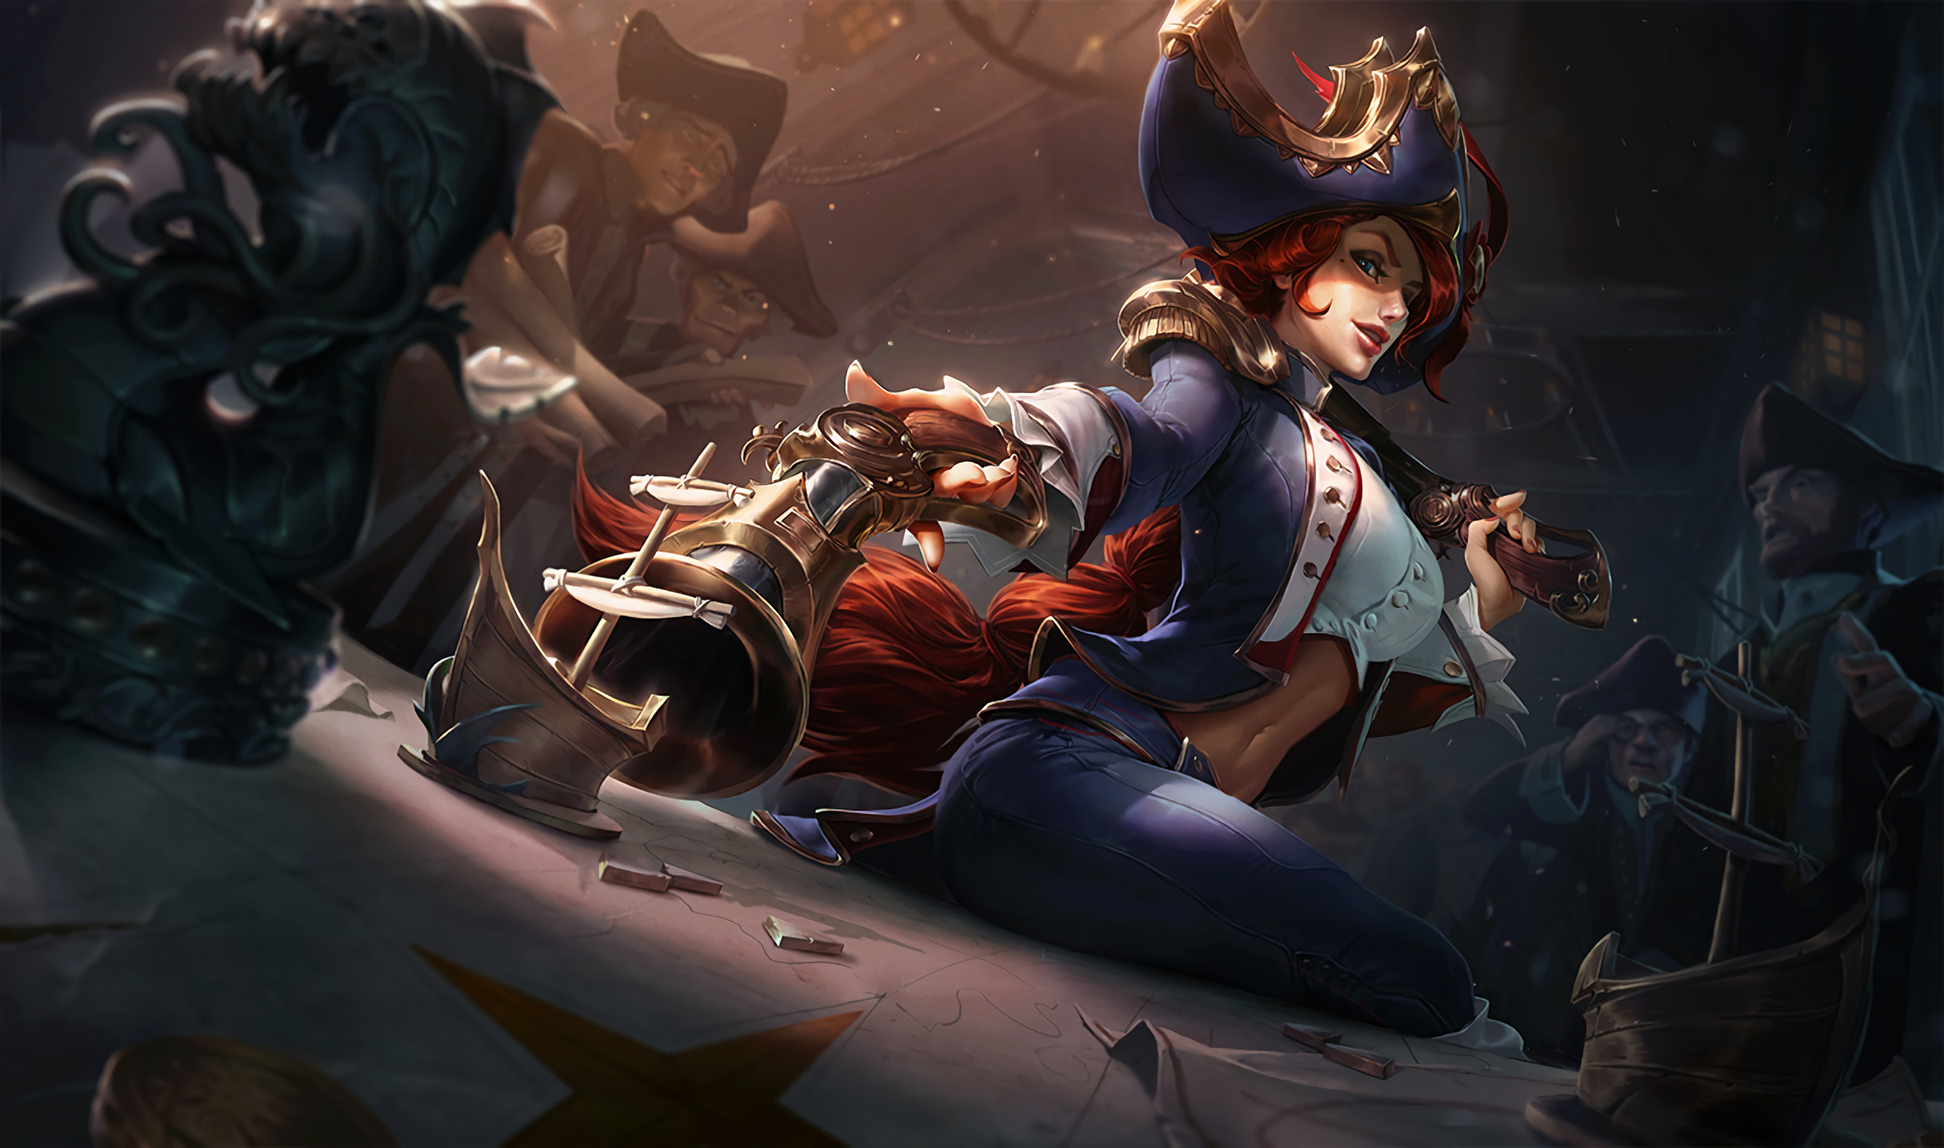 General 1944x1148 Miss Fortune (League of Legends) League of Legends weapon video games video game characters video game girls Riot Games